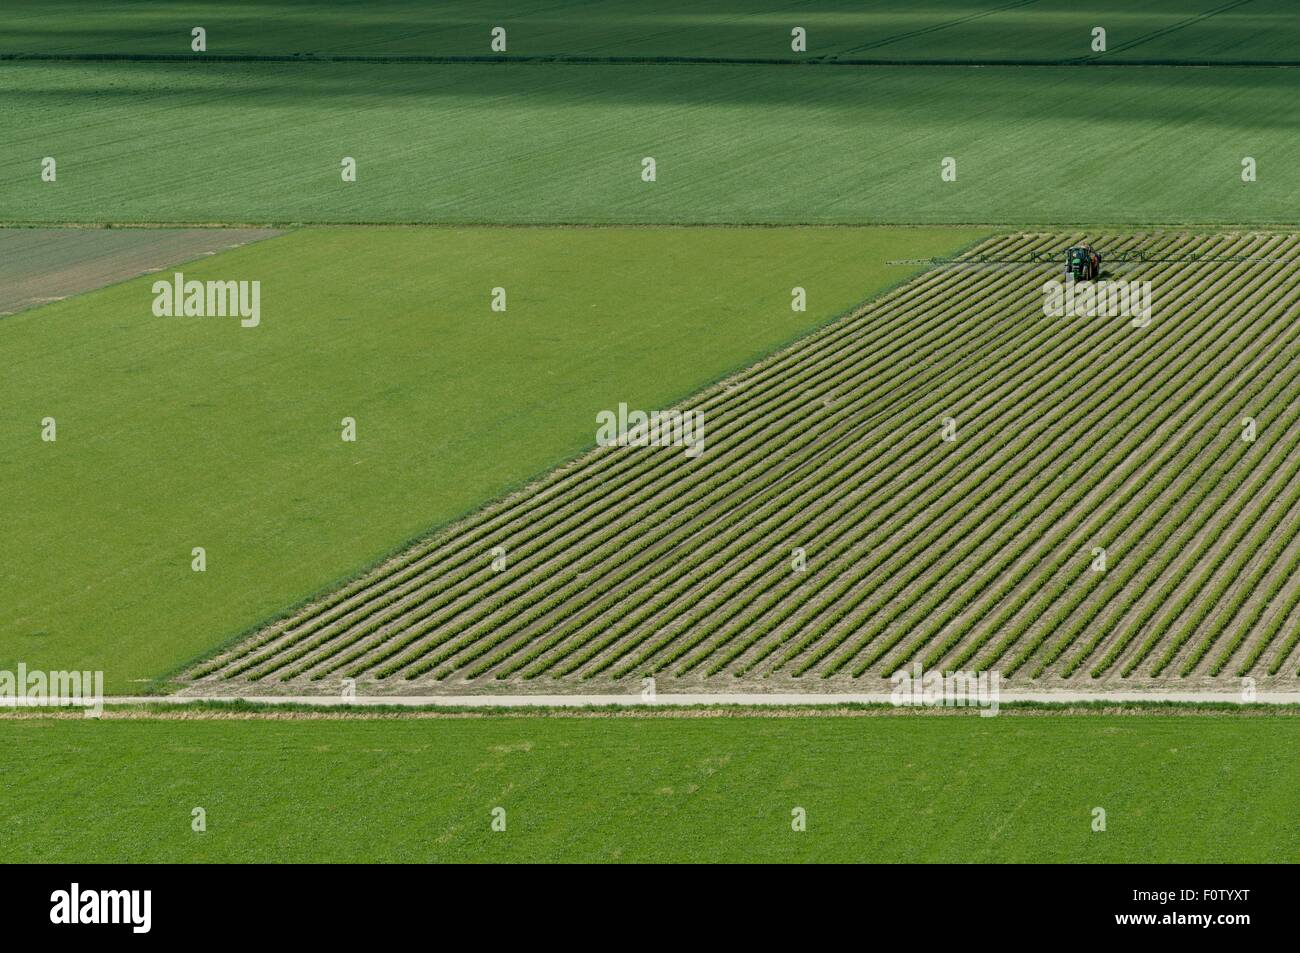 Tractor spraying a field with pesticide Stock Photo